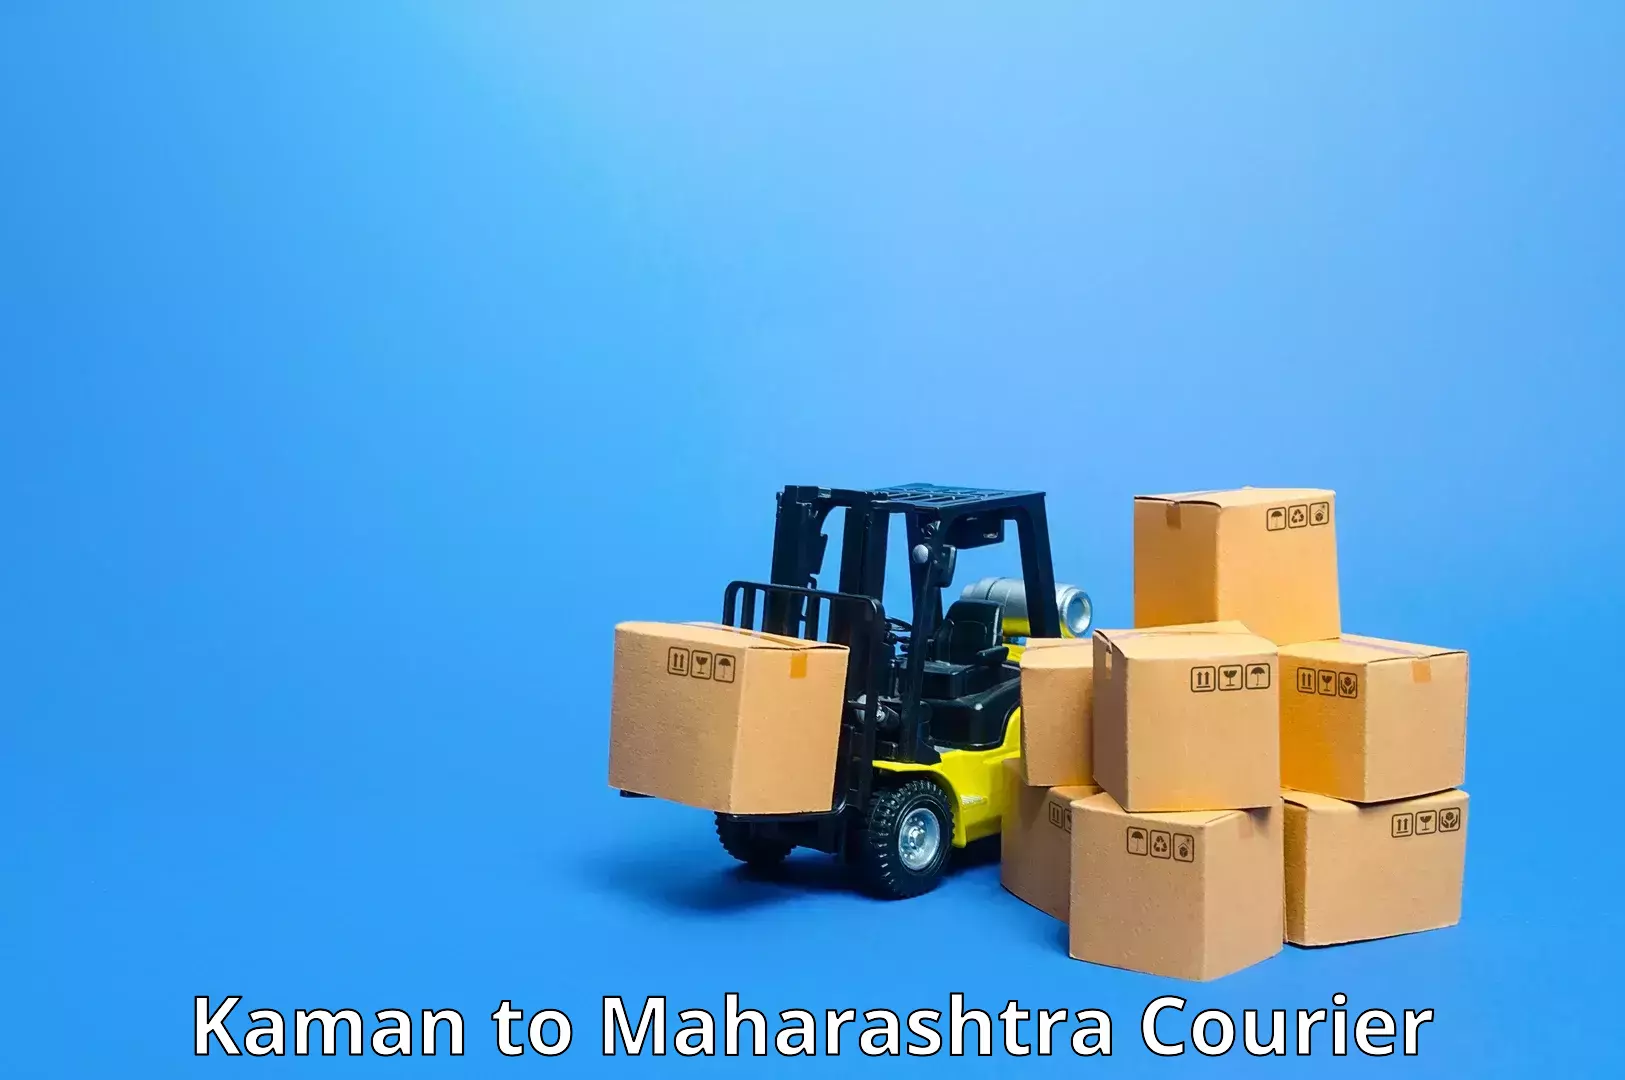 State-of-the-art courier technology Kaman to Worli